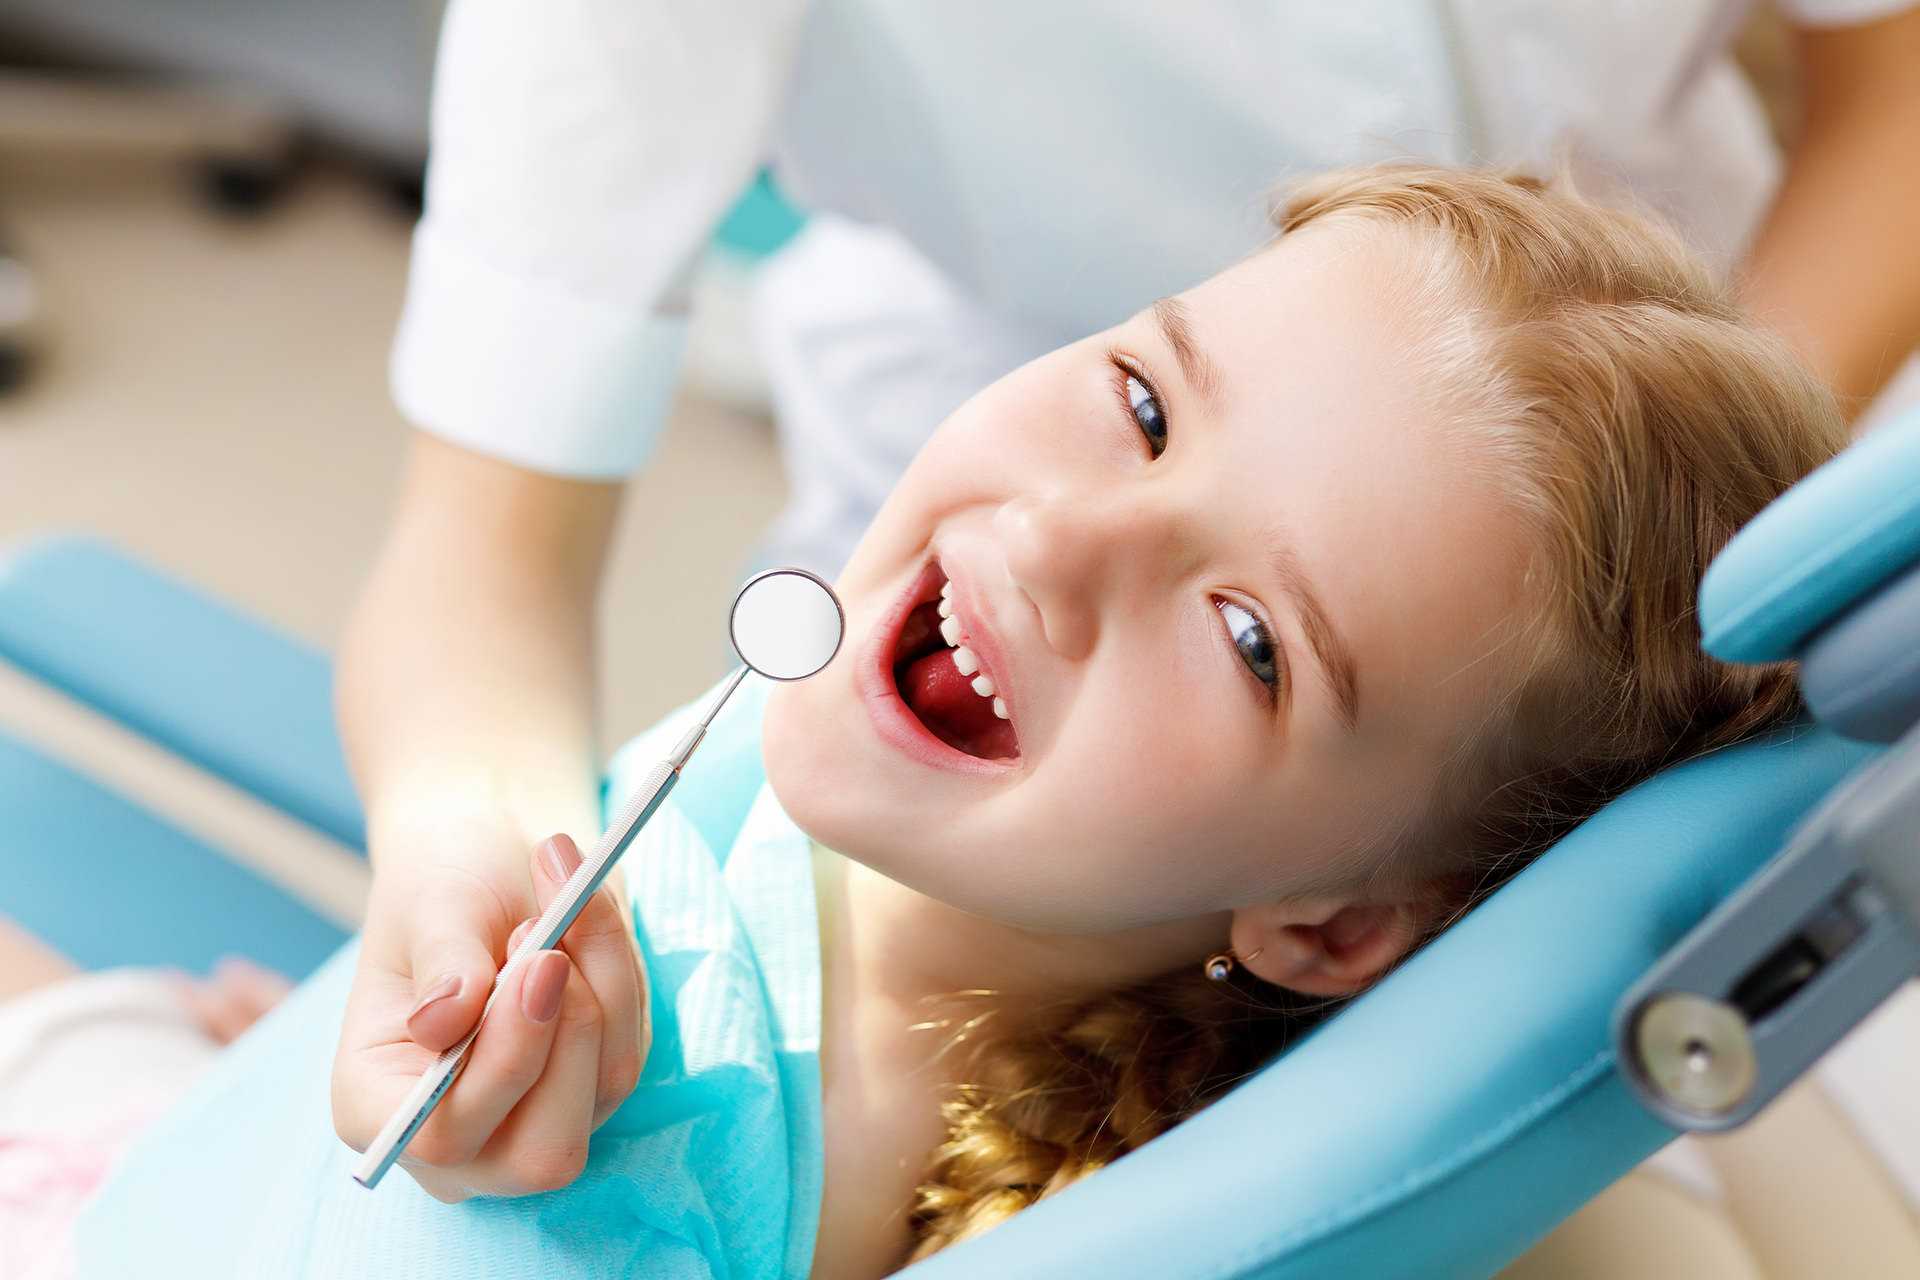 What are the Advantages of Early Visits to a Pediatric Dentist?